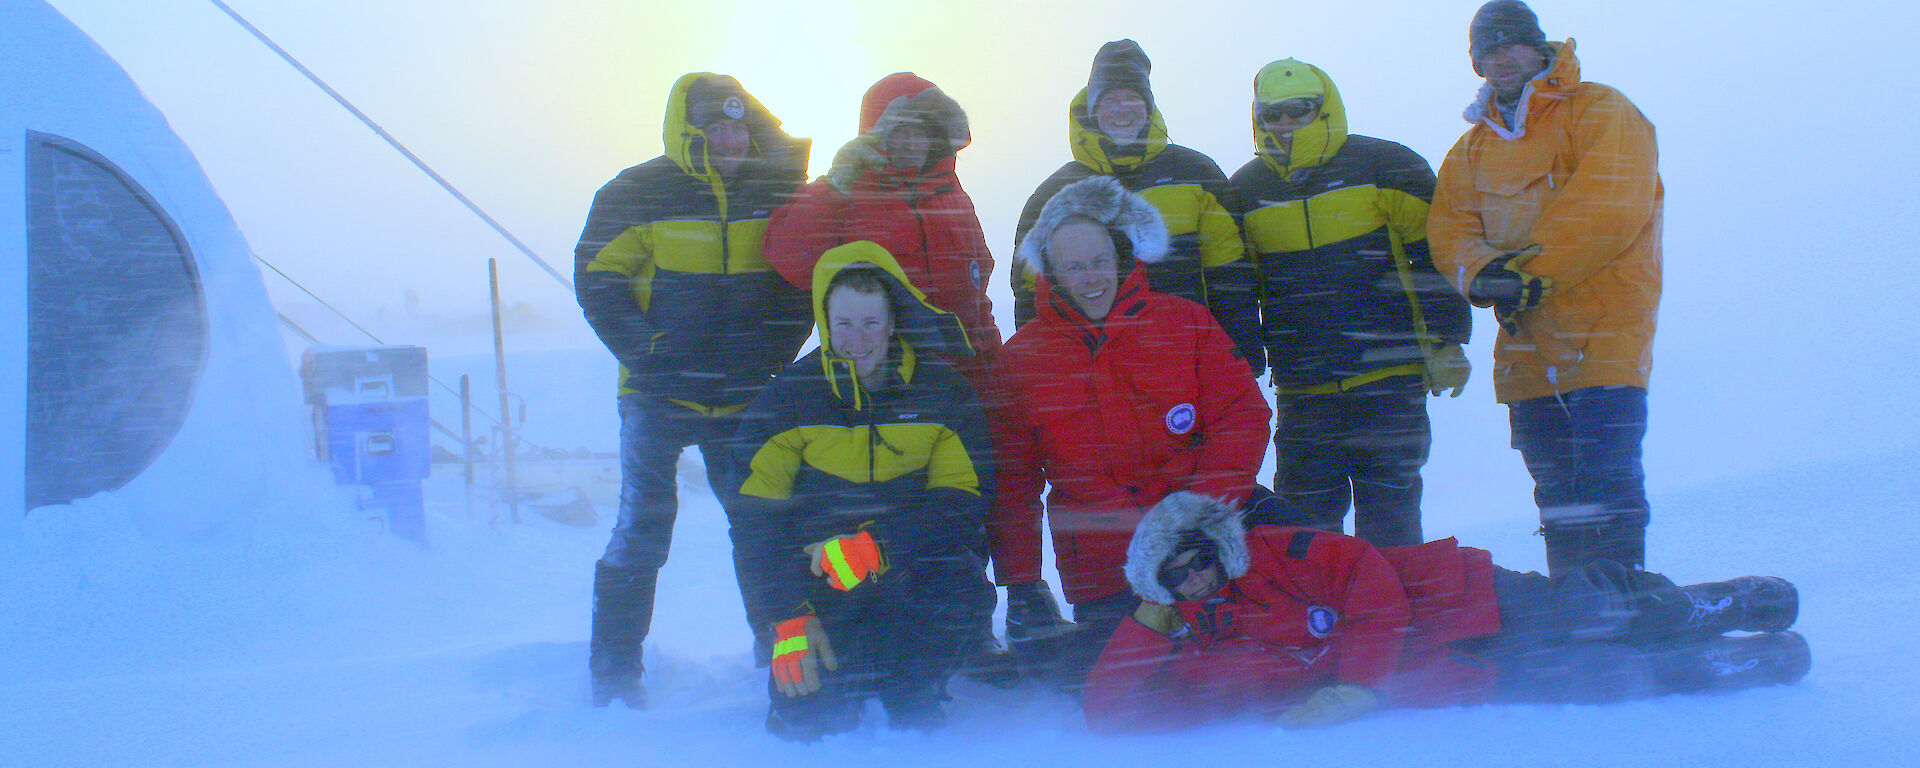 Eight people wearing down jackets posing for the camera during an Antarctic blizzard.